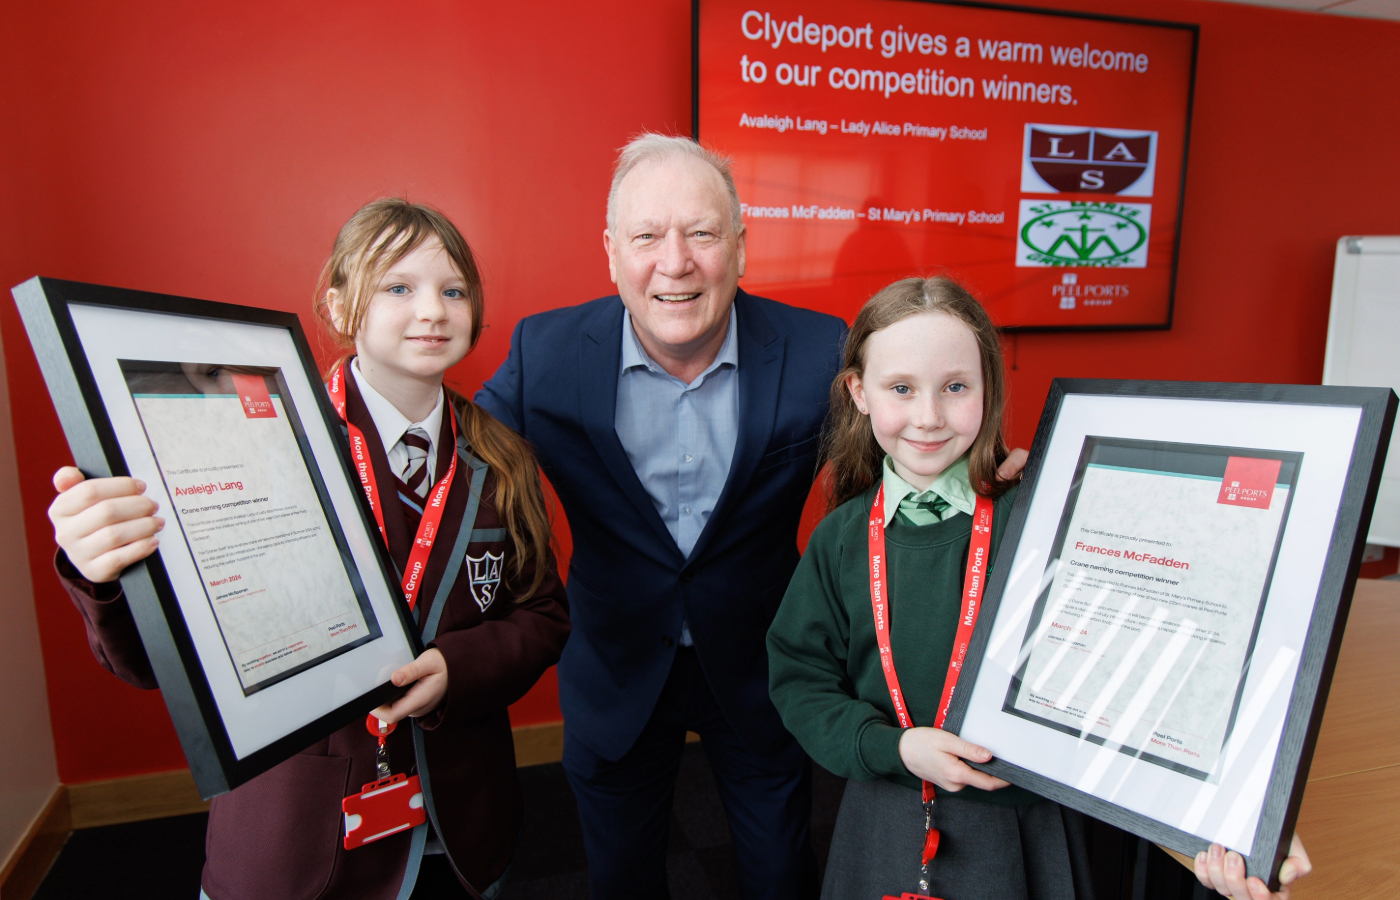 Port director Jim McSporran pictured with competition winners Avaleigh Lang, left, and Frances McFadden, right.